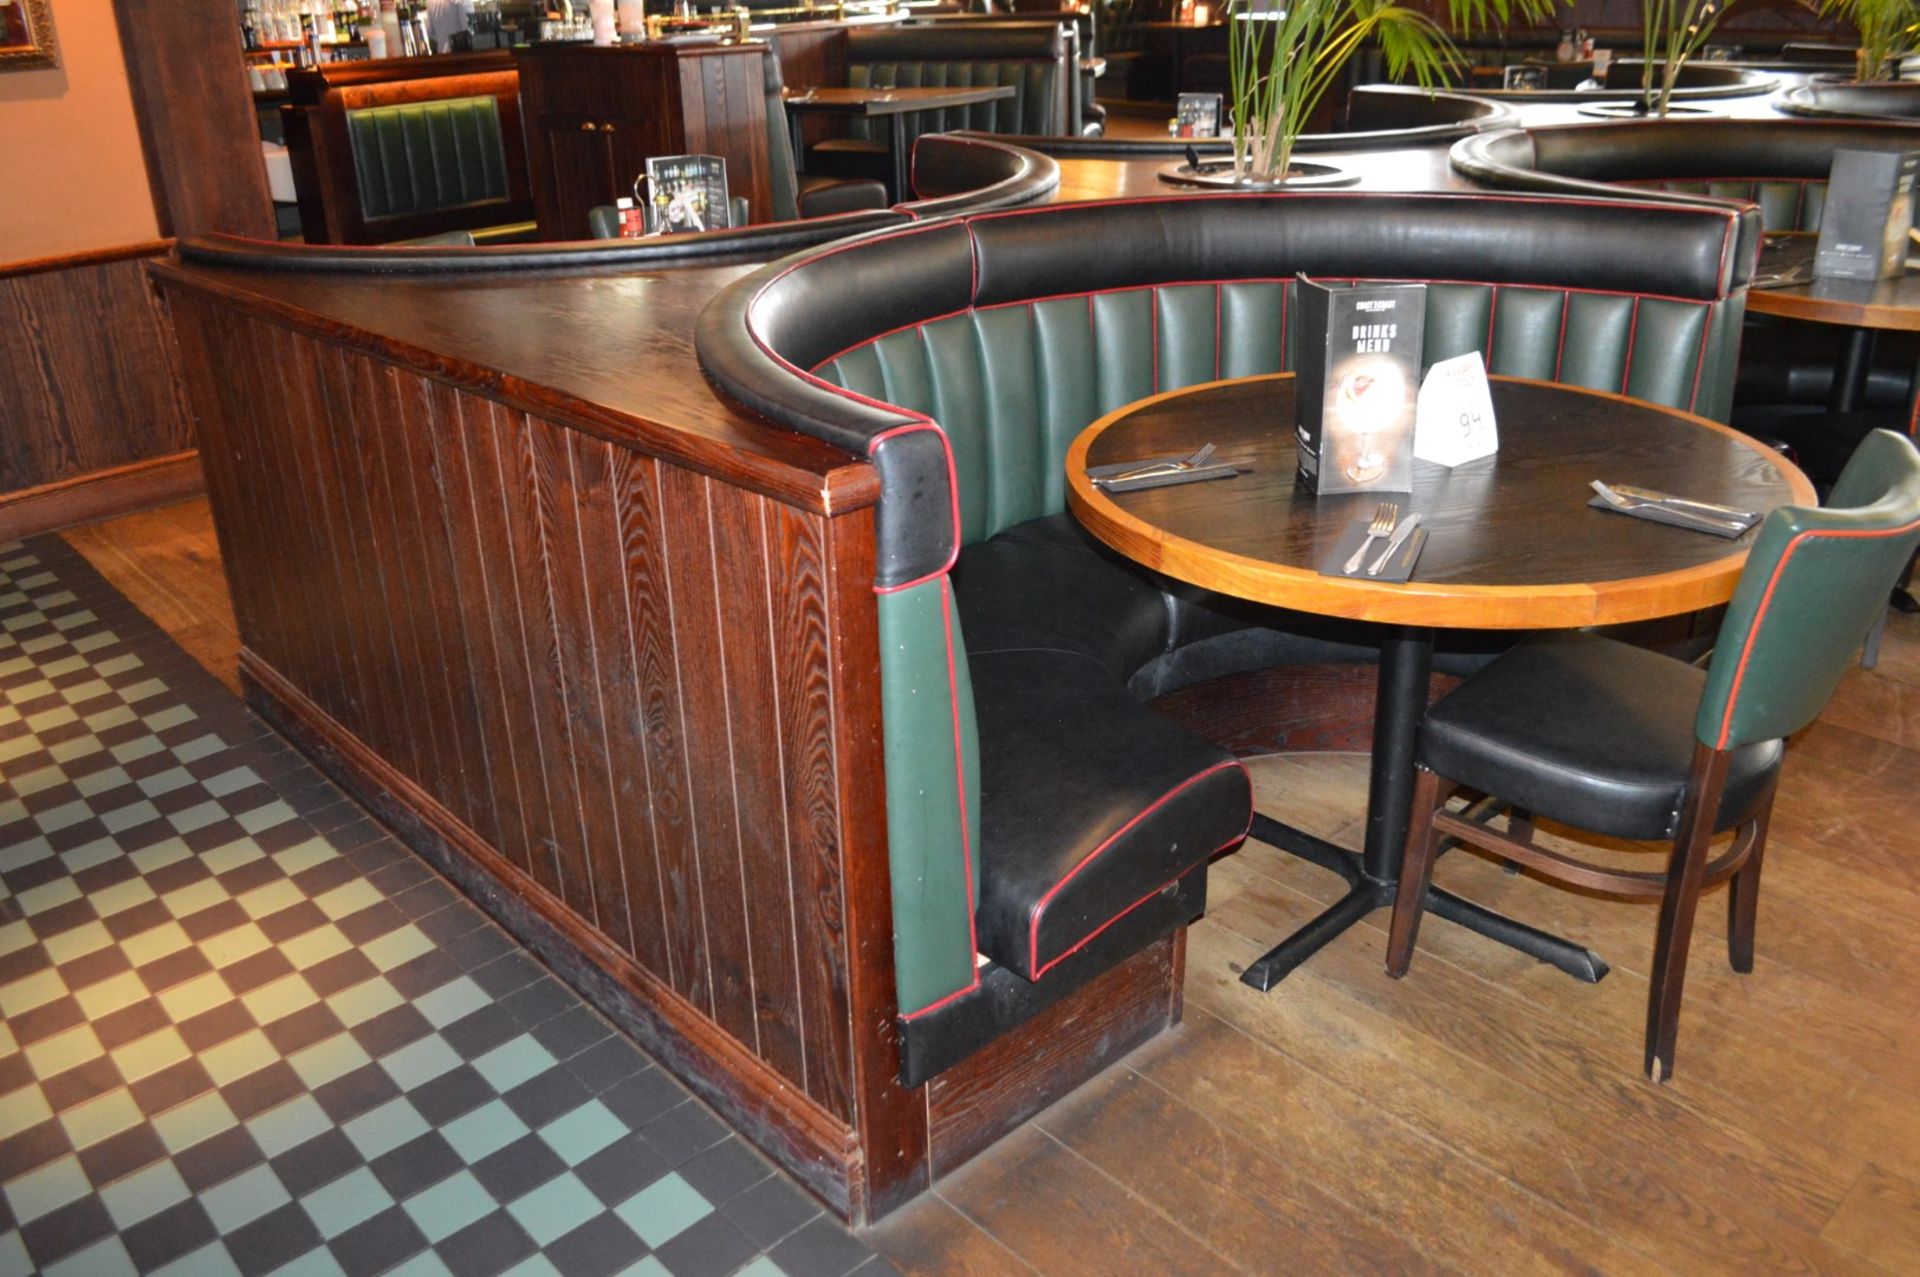 8 x Contemporary Half Circle Seating Booths Waitress Point and Wood Paneling - Features a Leather - Image 7 of 17